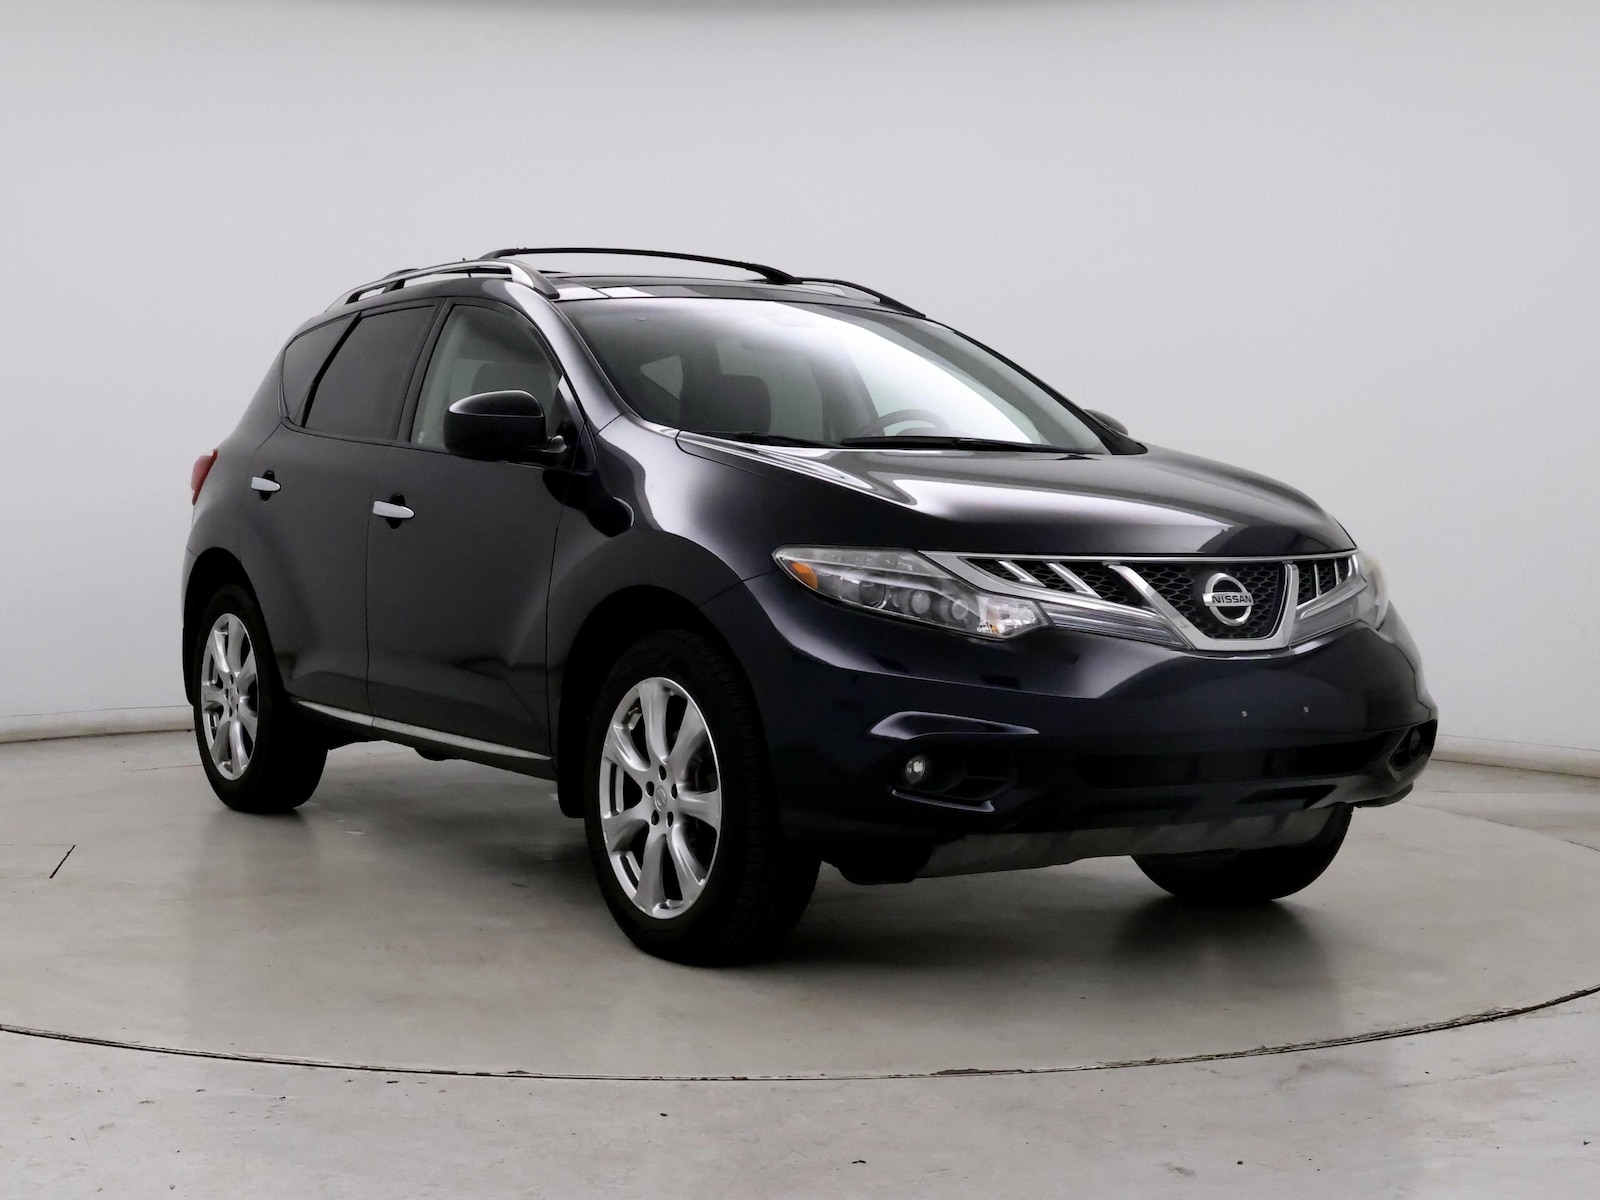 Used 2012 Nissan Murano LE with VIN JN8AZ1MUXCW110539 for sale in Spokane Valley, WA